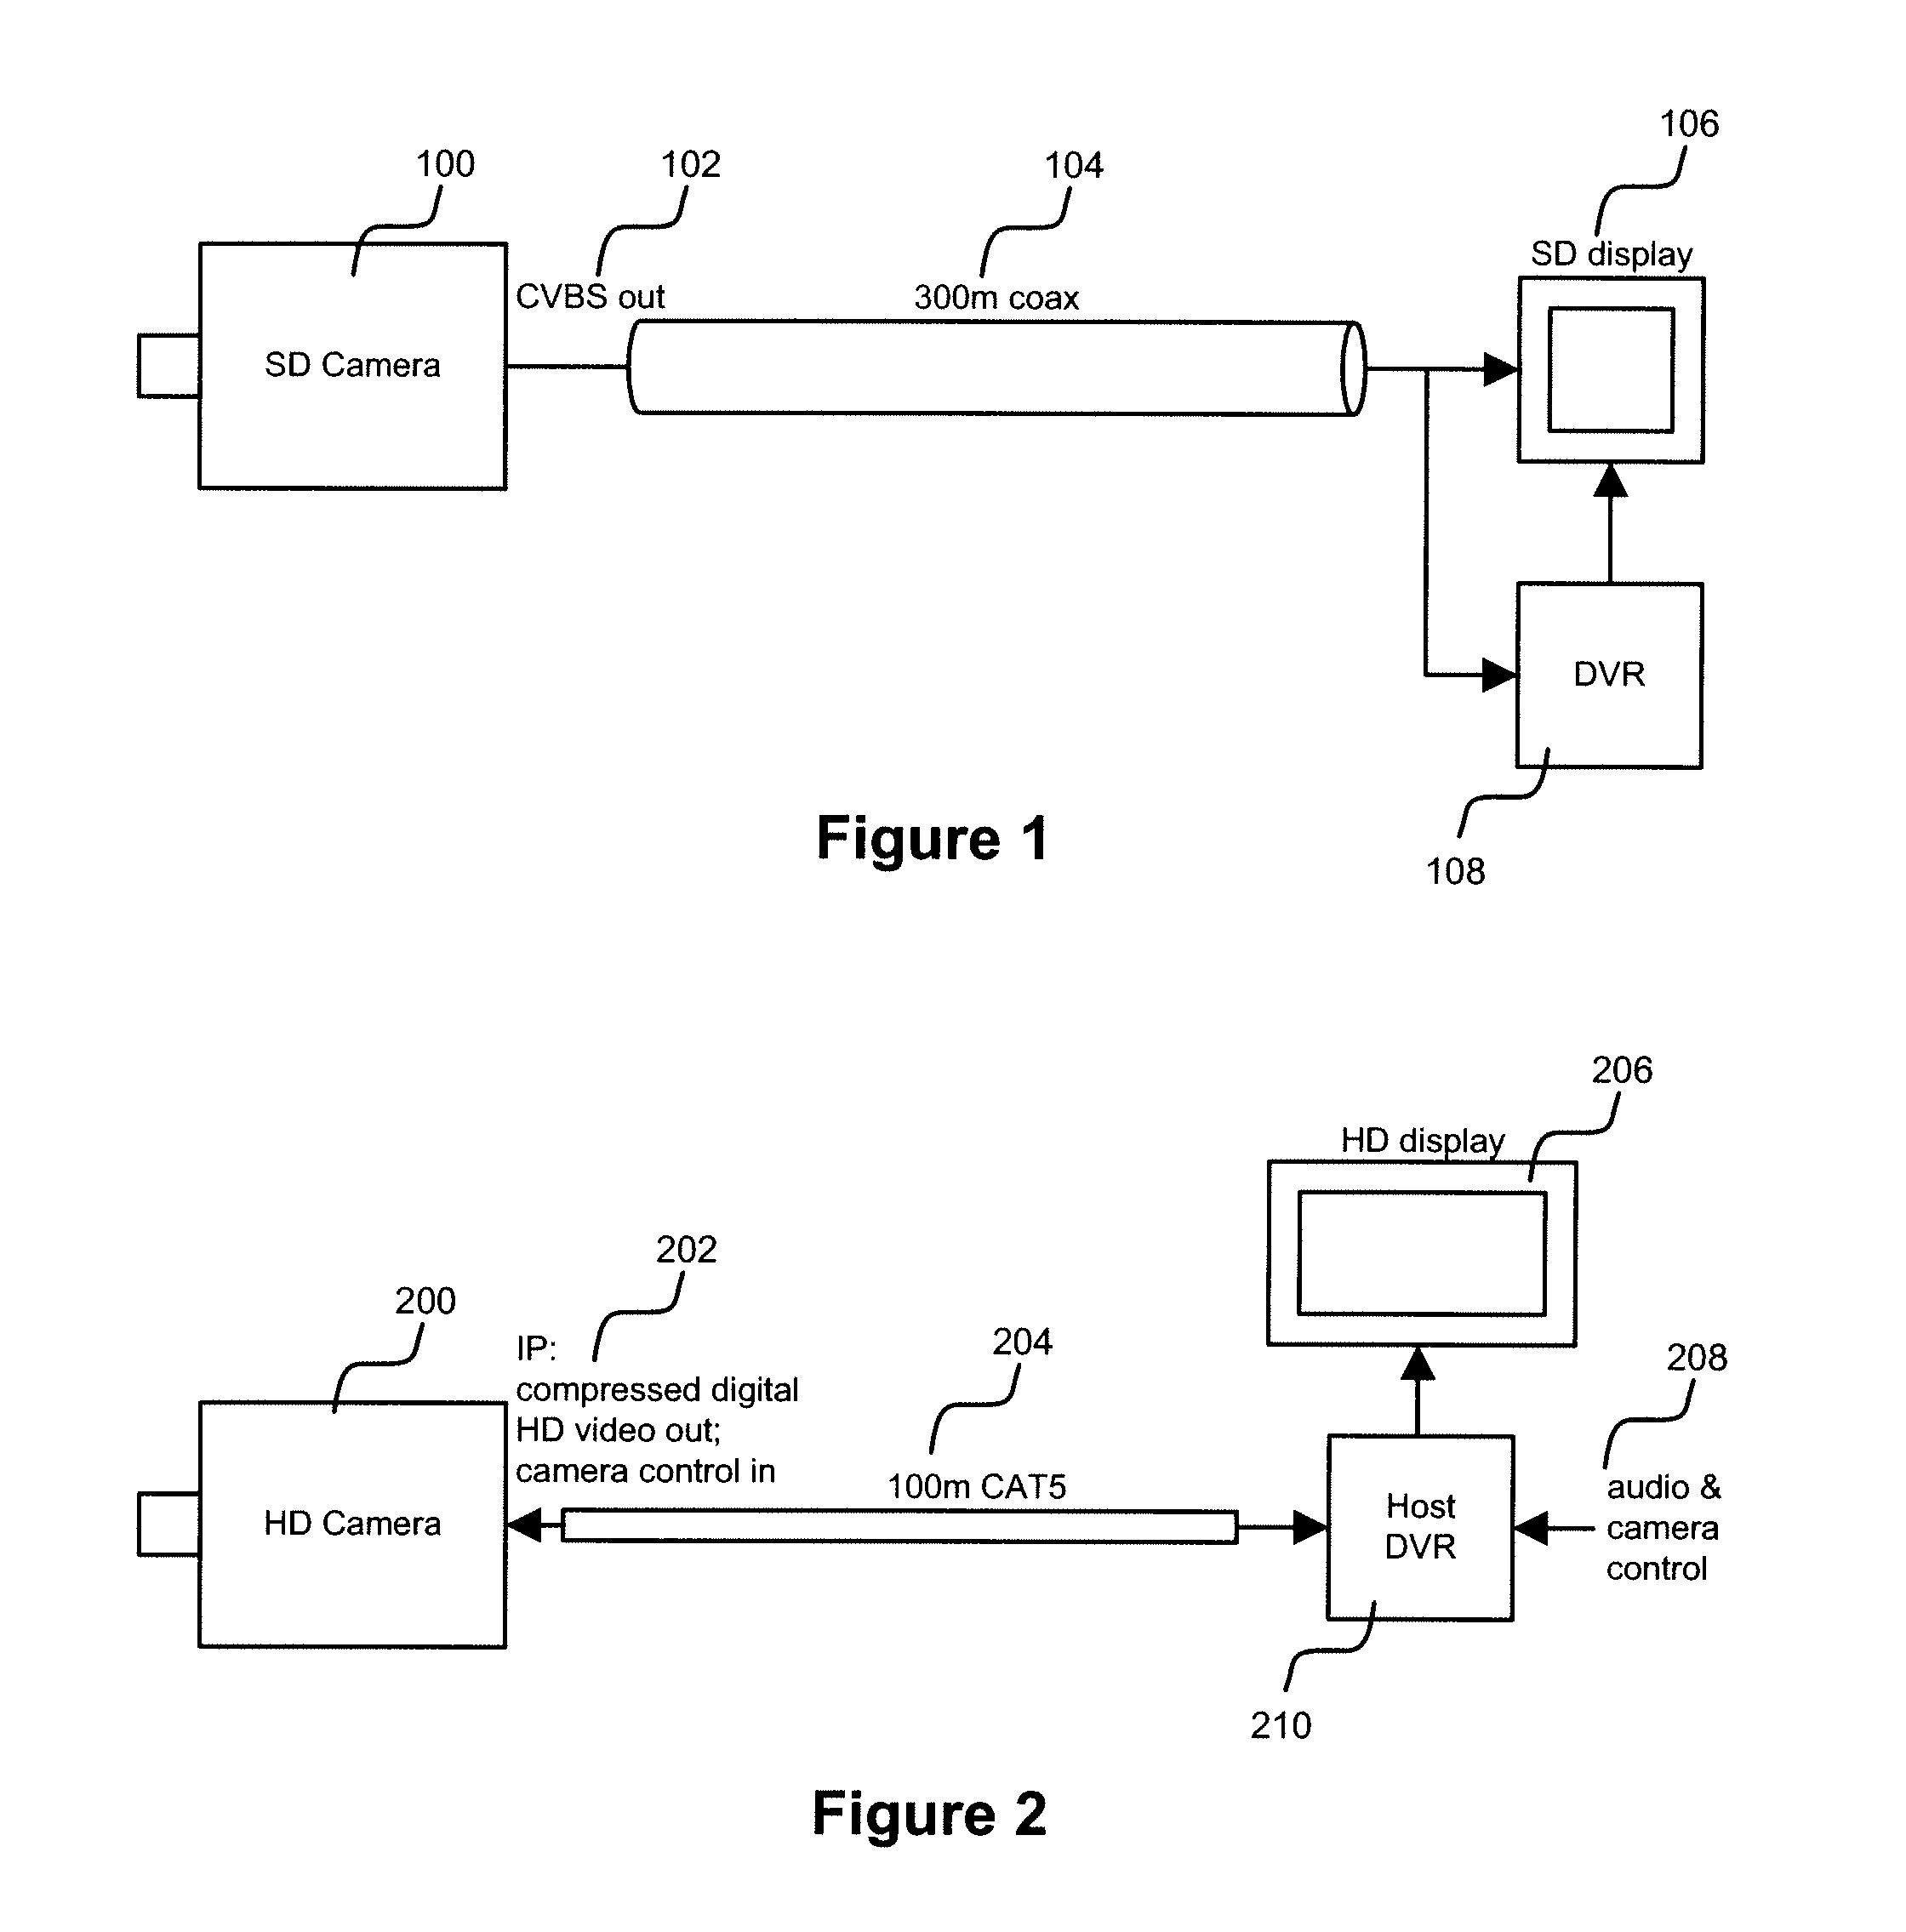 Analog equalizer systems and methods for baseband video signals